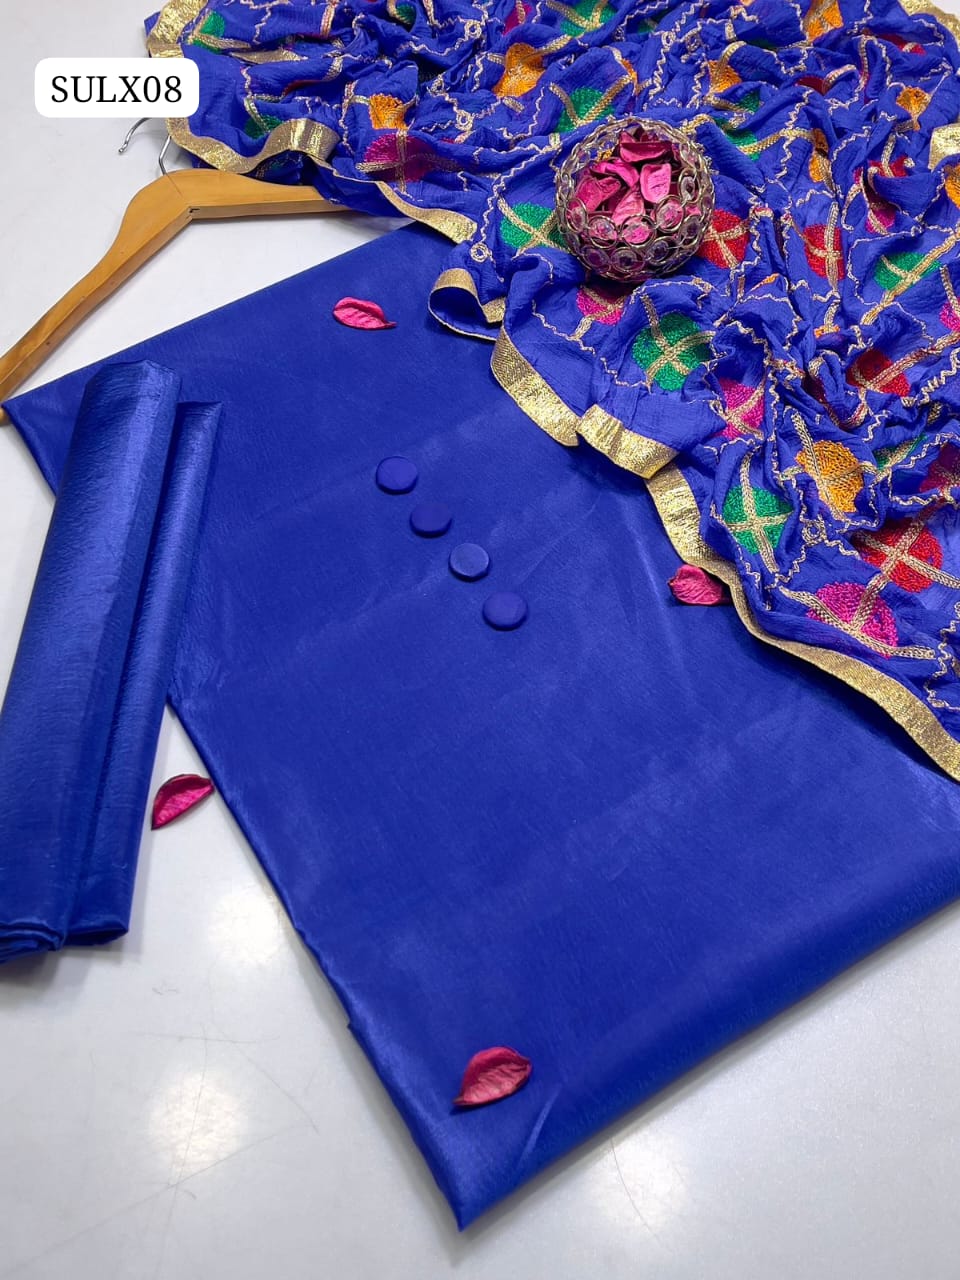 Kataan Silk Fabric Plain Shirt With Chiffon Base Multi Aari Heavy Embroidery Dupatta With 4 Side Border And Kataan Silk Plain Trouser 3Pc Dress With 4 Matching Buttons Gift